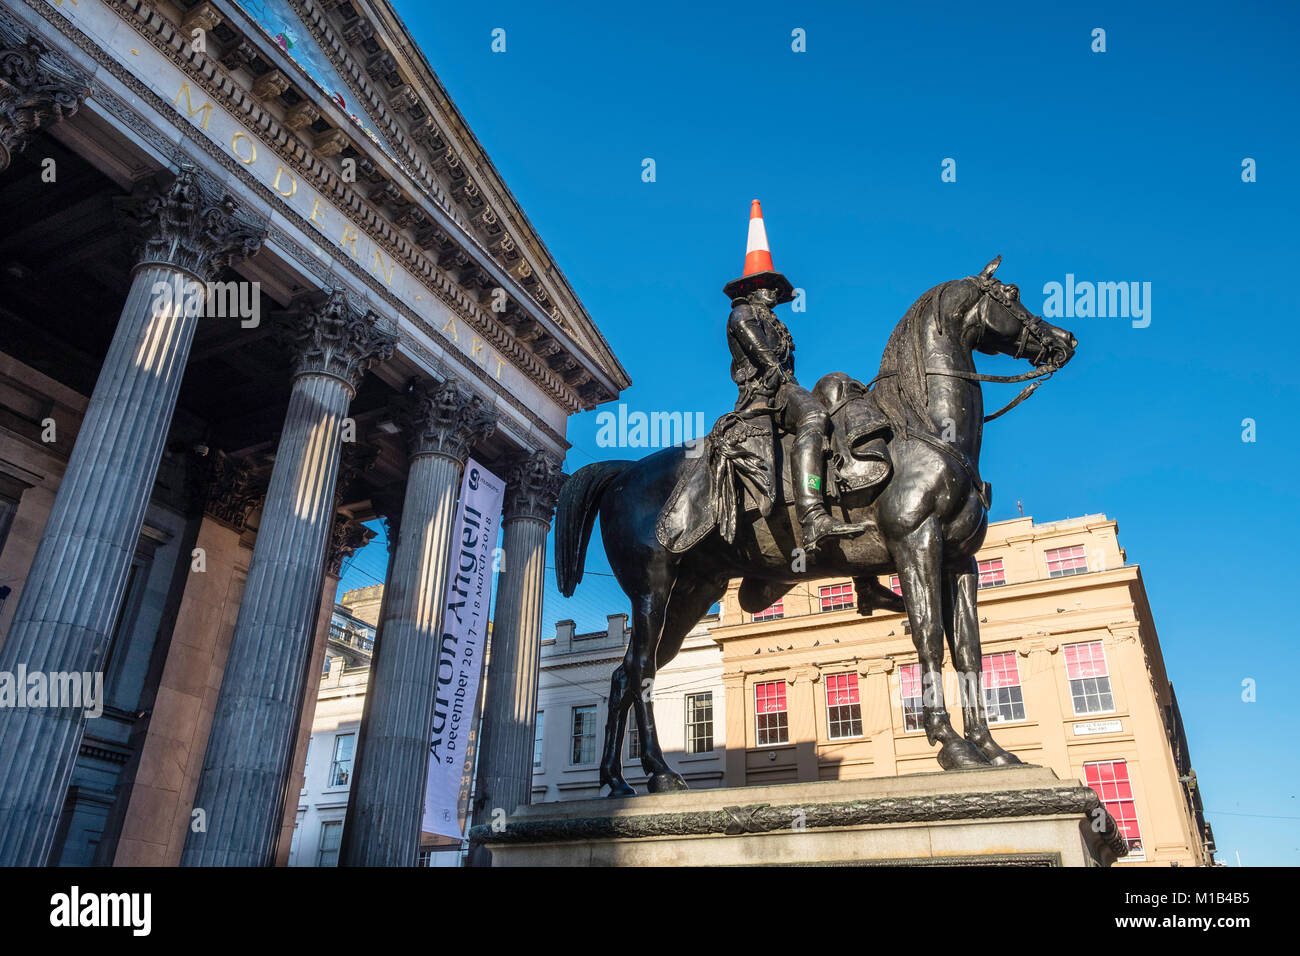 Statue of Wellington on horseback with traffic cone on his head at Gallery of Modern Art in Exchange Square, Glasgow, United Kingdom Stock Photo